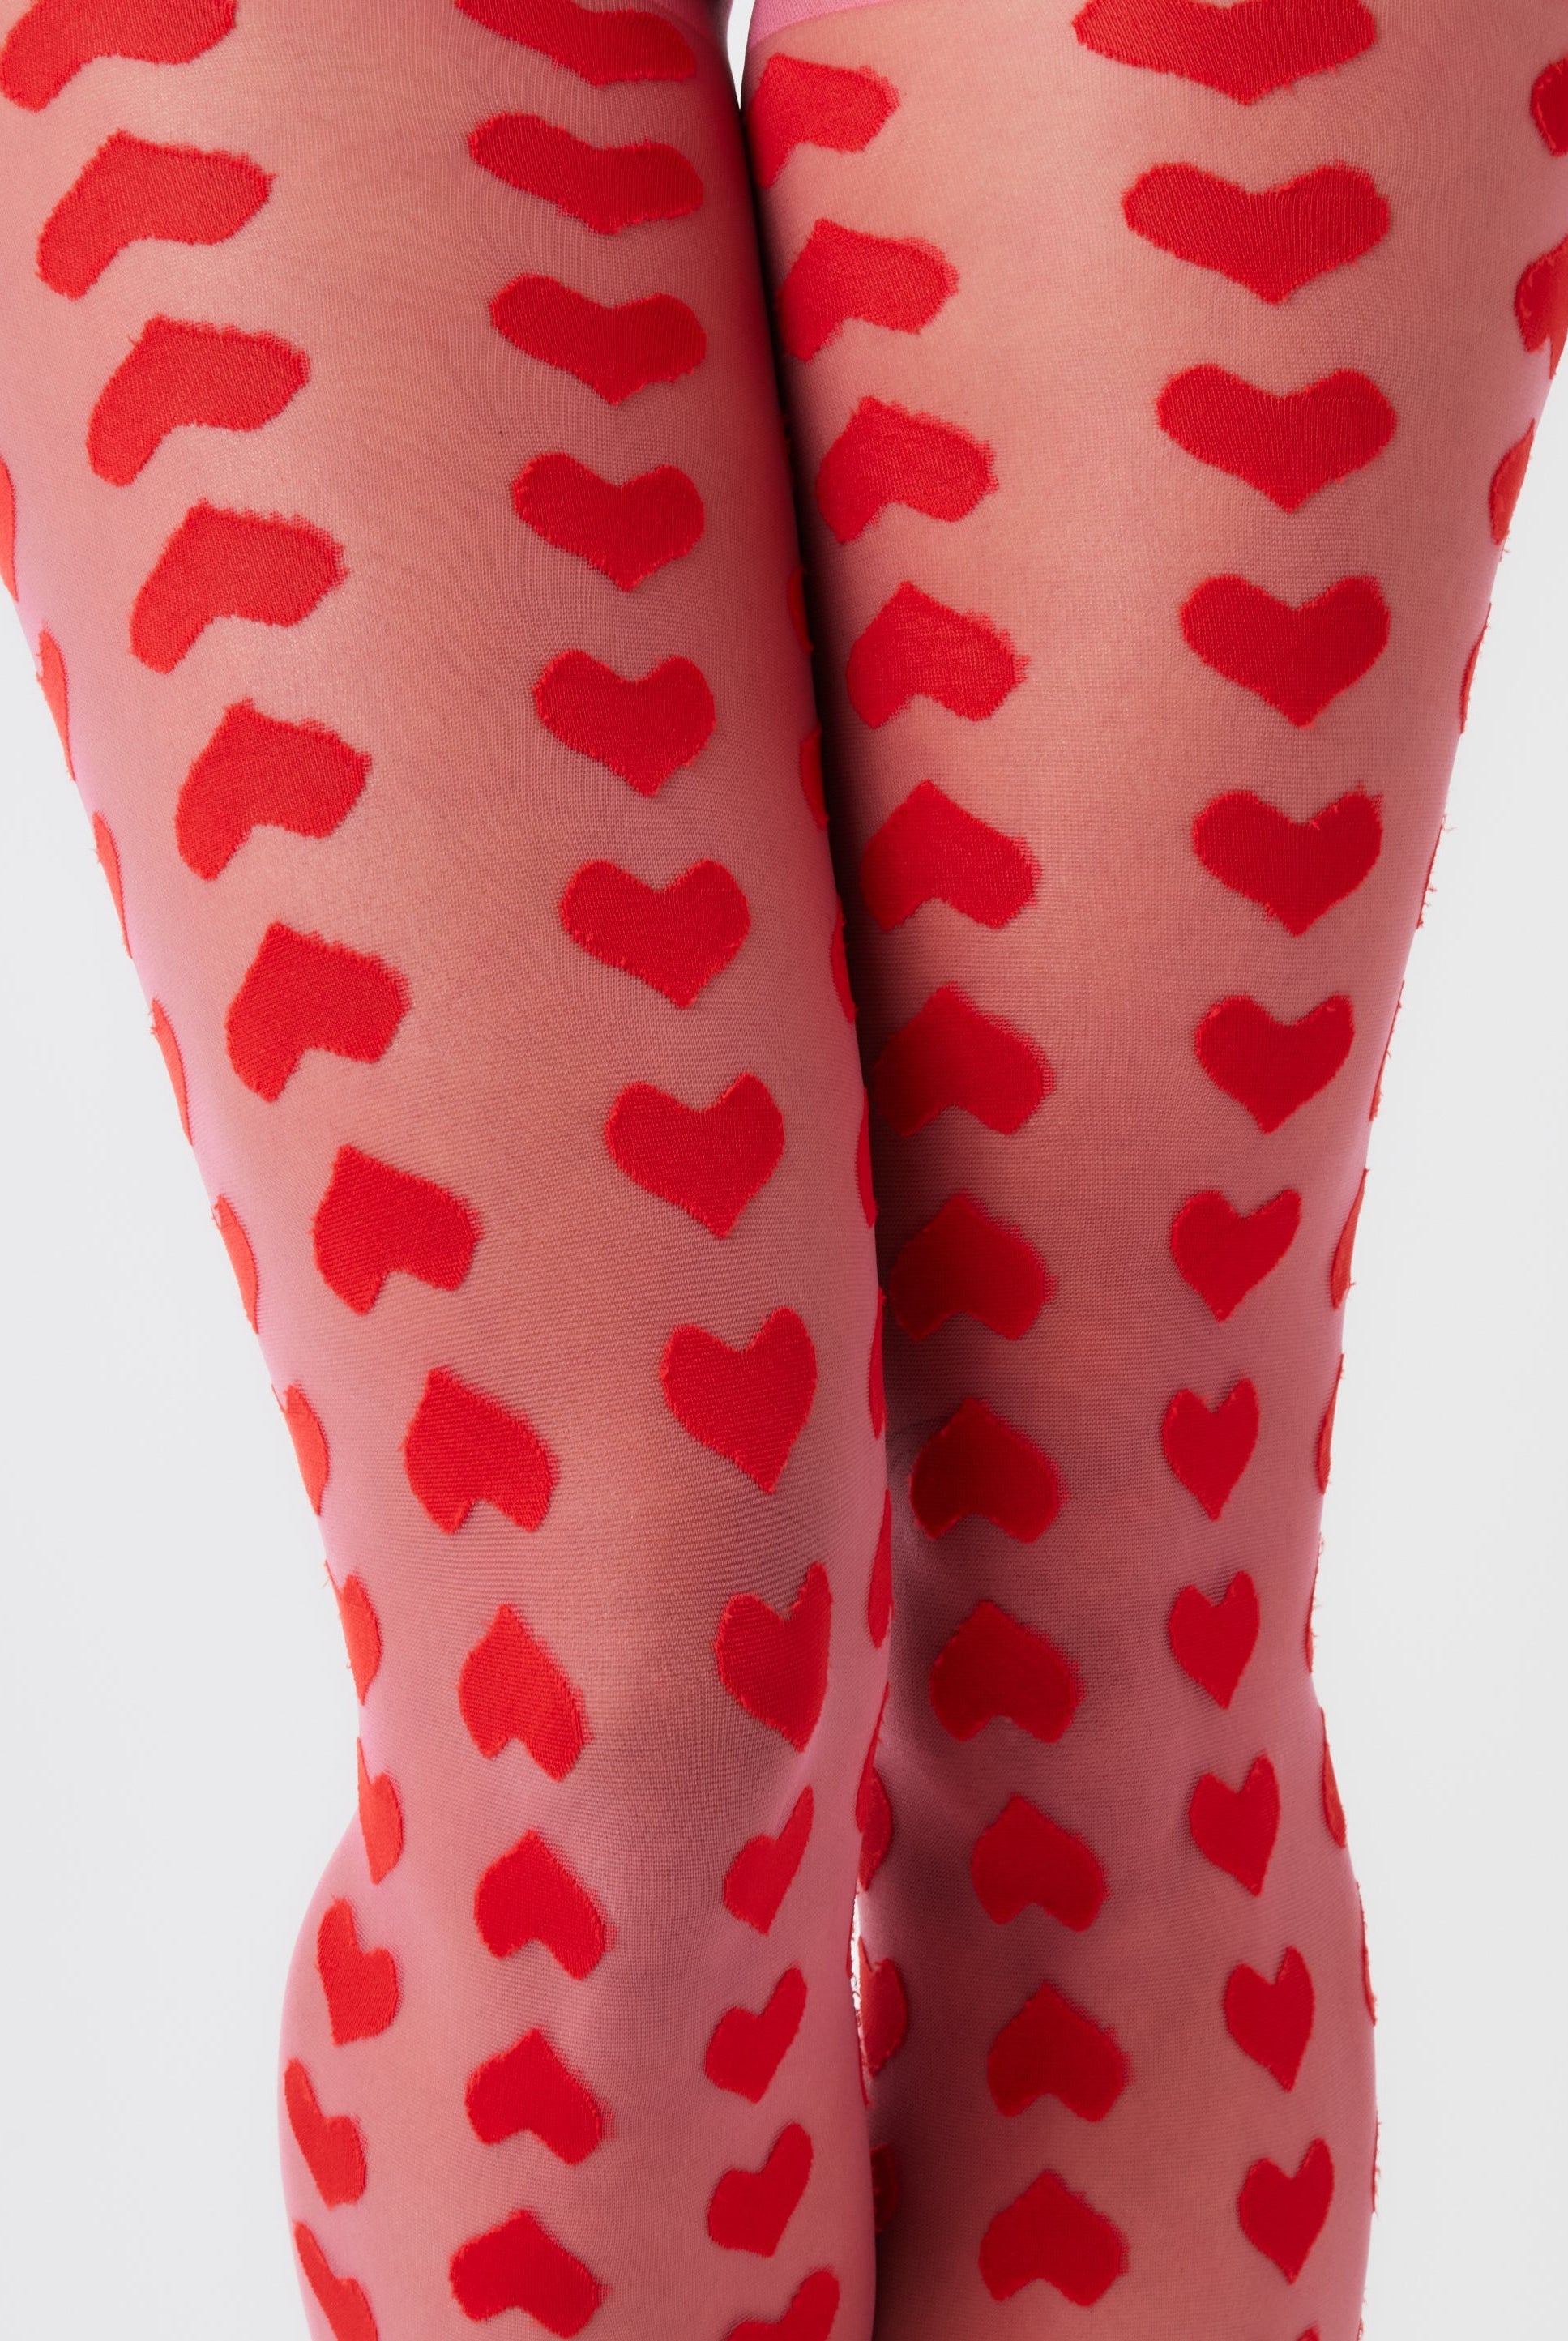 Heart monogram tights | pink tights | women's tights | fun tights | women's pink tights | Soft e girl | Weird girl | Fun | Playful | Kidcore | Quirky | Pin up | Halloween | Costume | Cosplay | Accessories